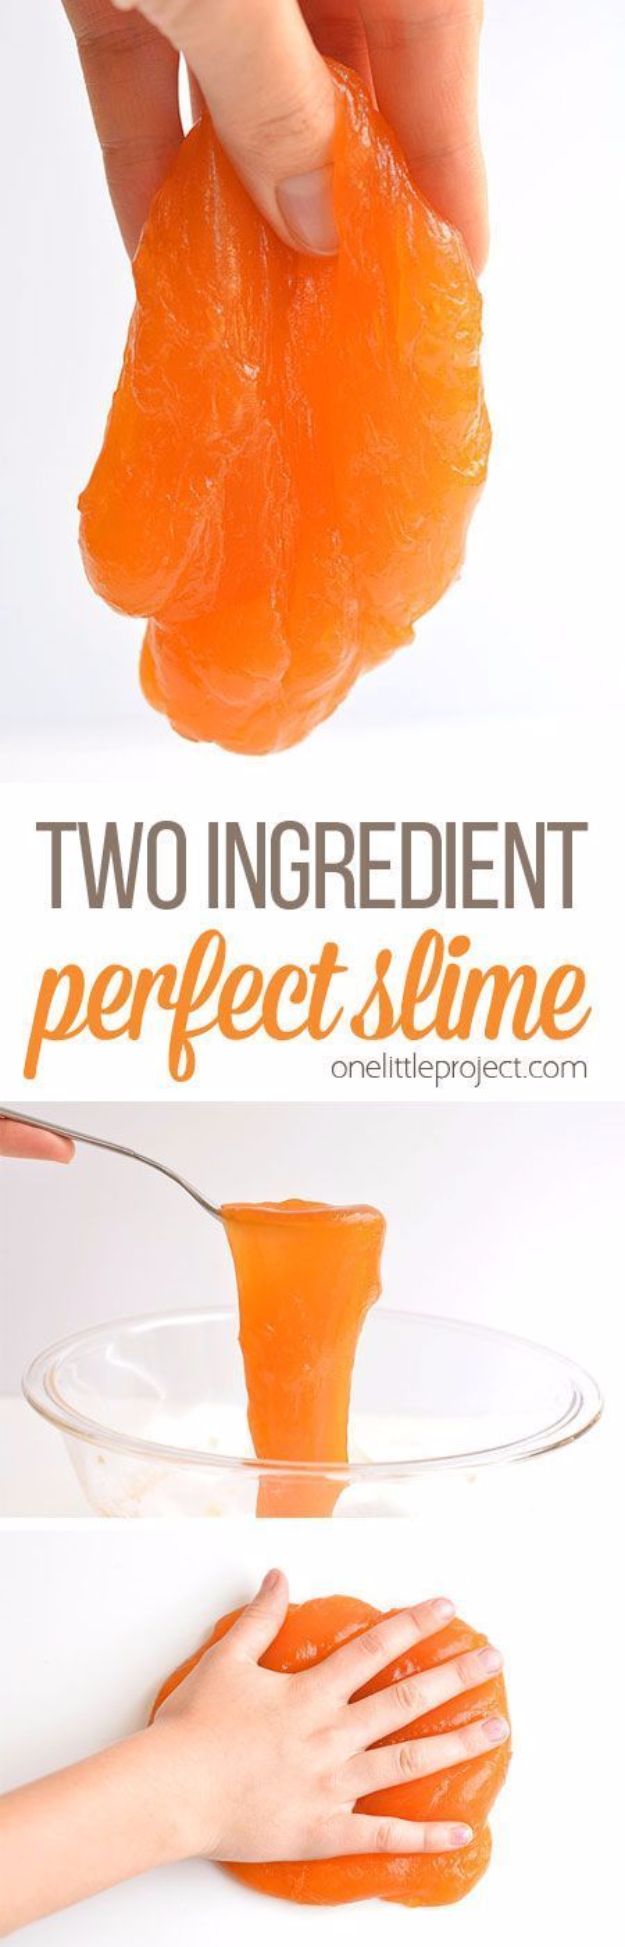 Best DIY Slime Recipes - Two Ingredient Perfect Slime - Cool and Easy Slime Recipe and Tutorials - Ideas Without Glue, Without Borax, For Kids, With Liquid Starch, Cornstarch and Laundry Detergent - How to Make Slime at Home - Fun Crafts and DIY Projects for Teens, Kids, Teenagers and Teens - Galaxy and Glitter Slime, Edible Slime, Rainbow Colored Slime, Shaving Cream recipes and more fun crafts and slimes #slimerecipes #slime #diyslime #teencrafts